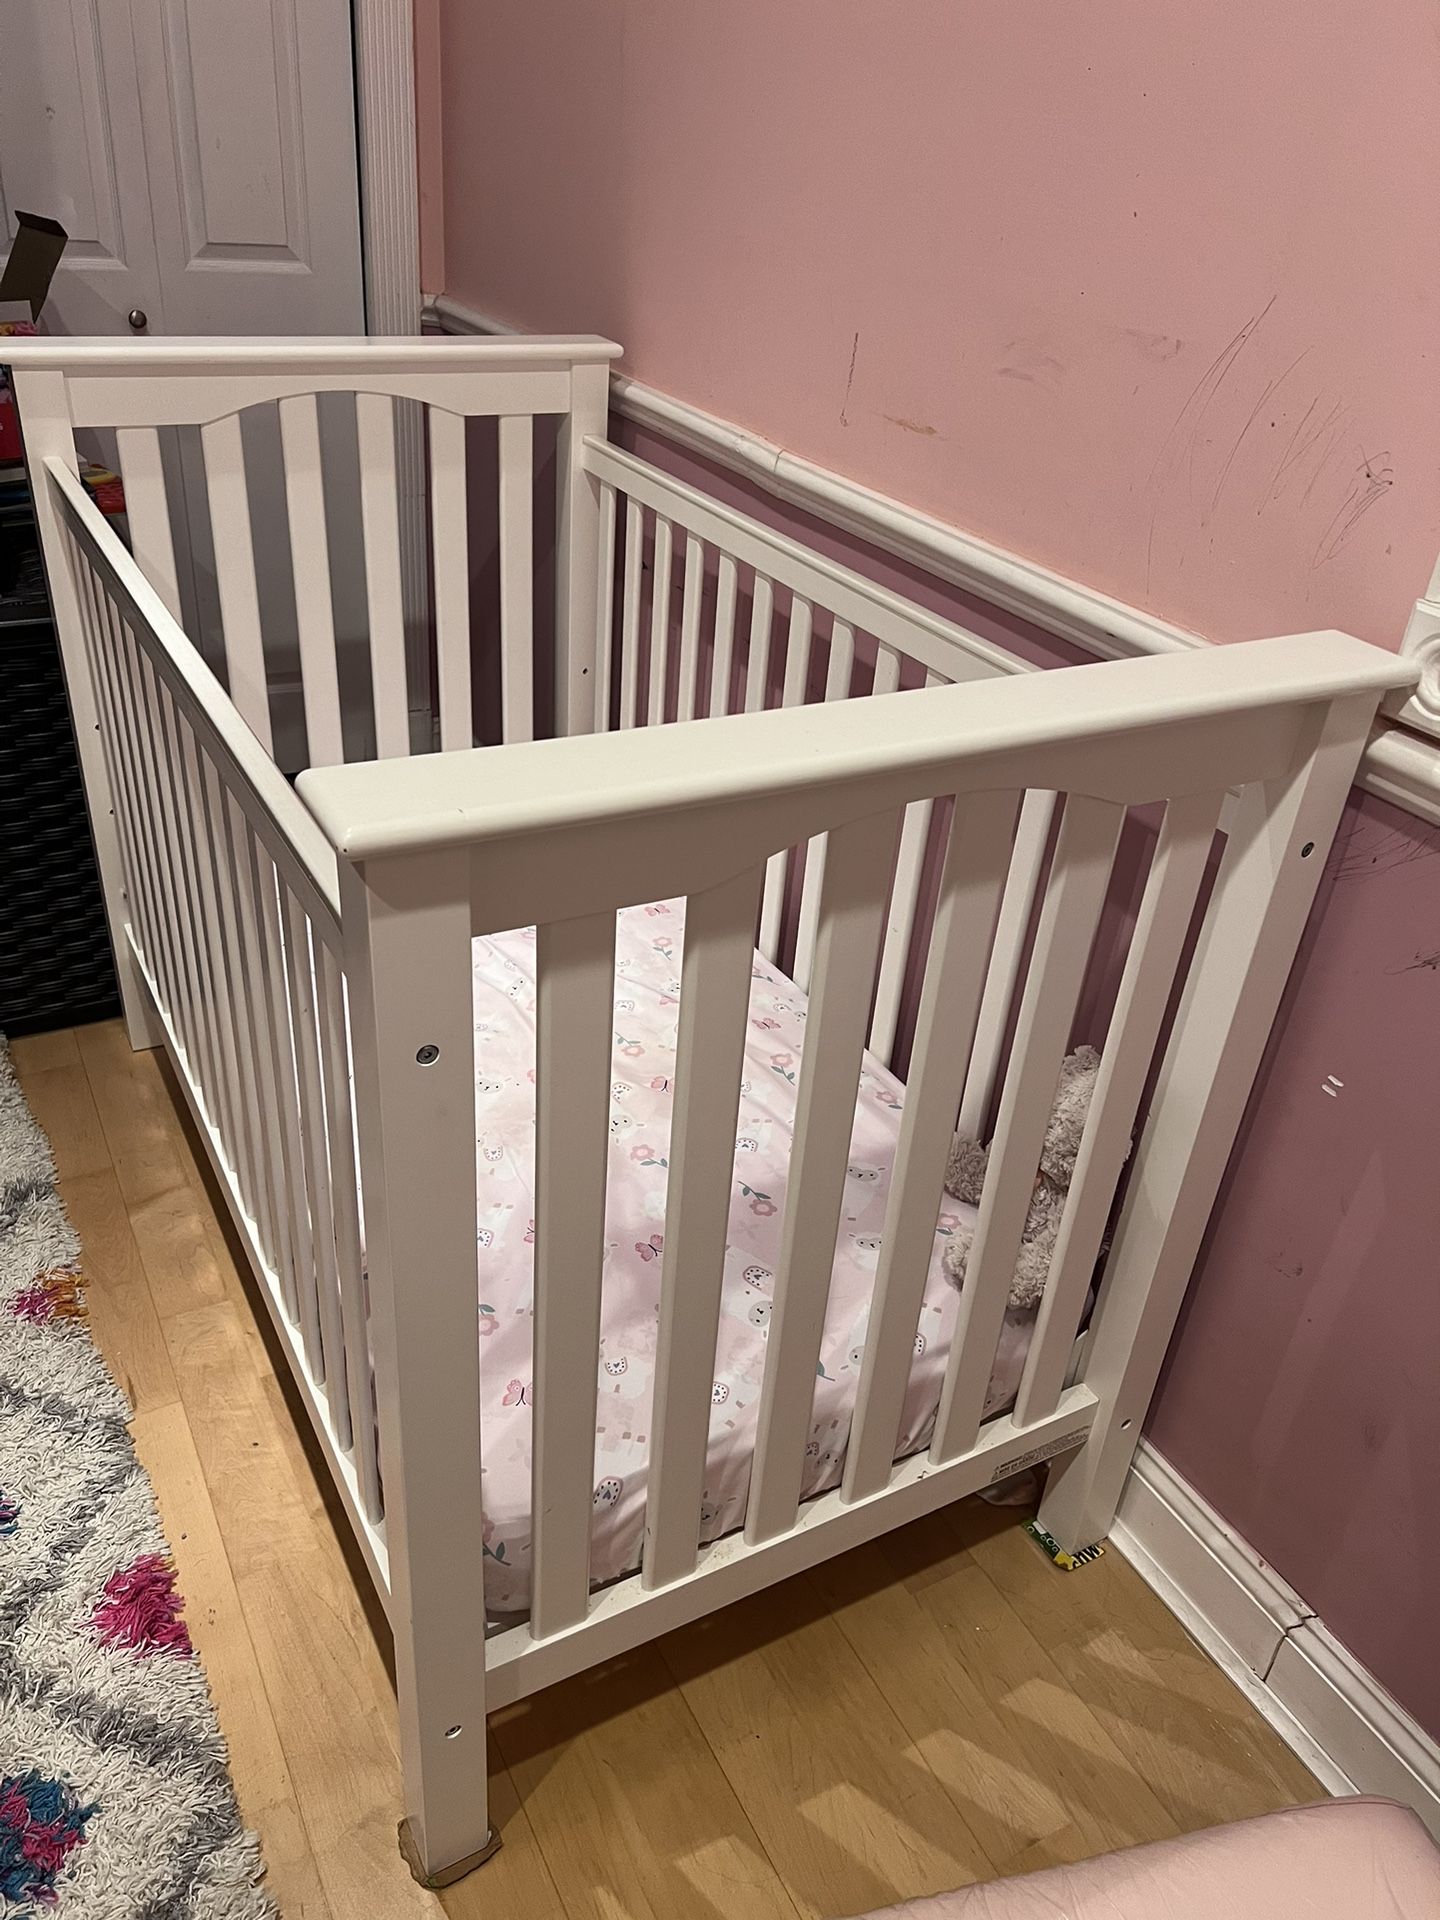 Crib and Changing Table